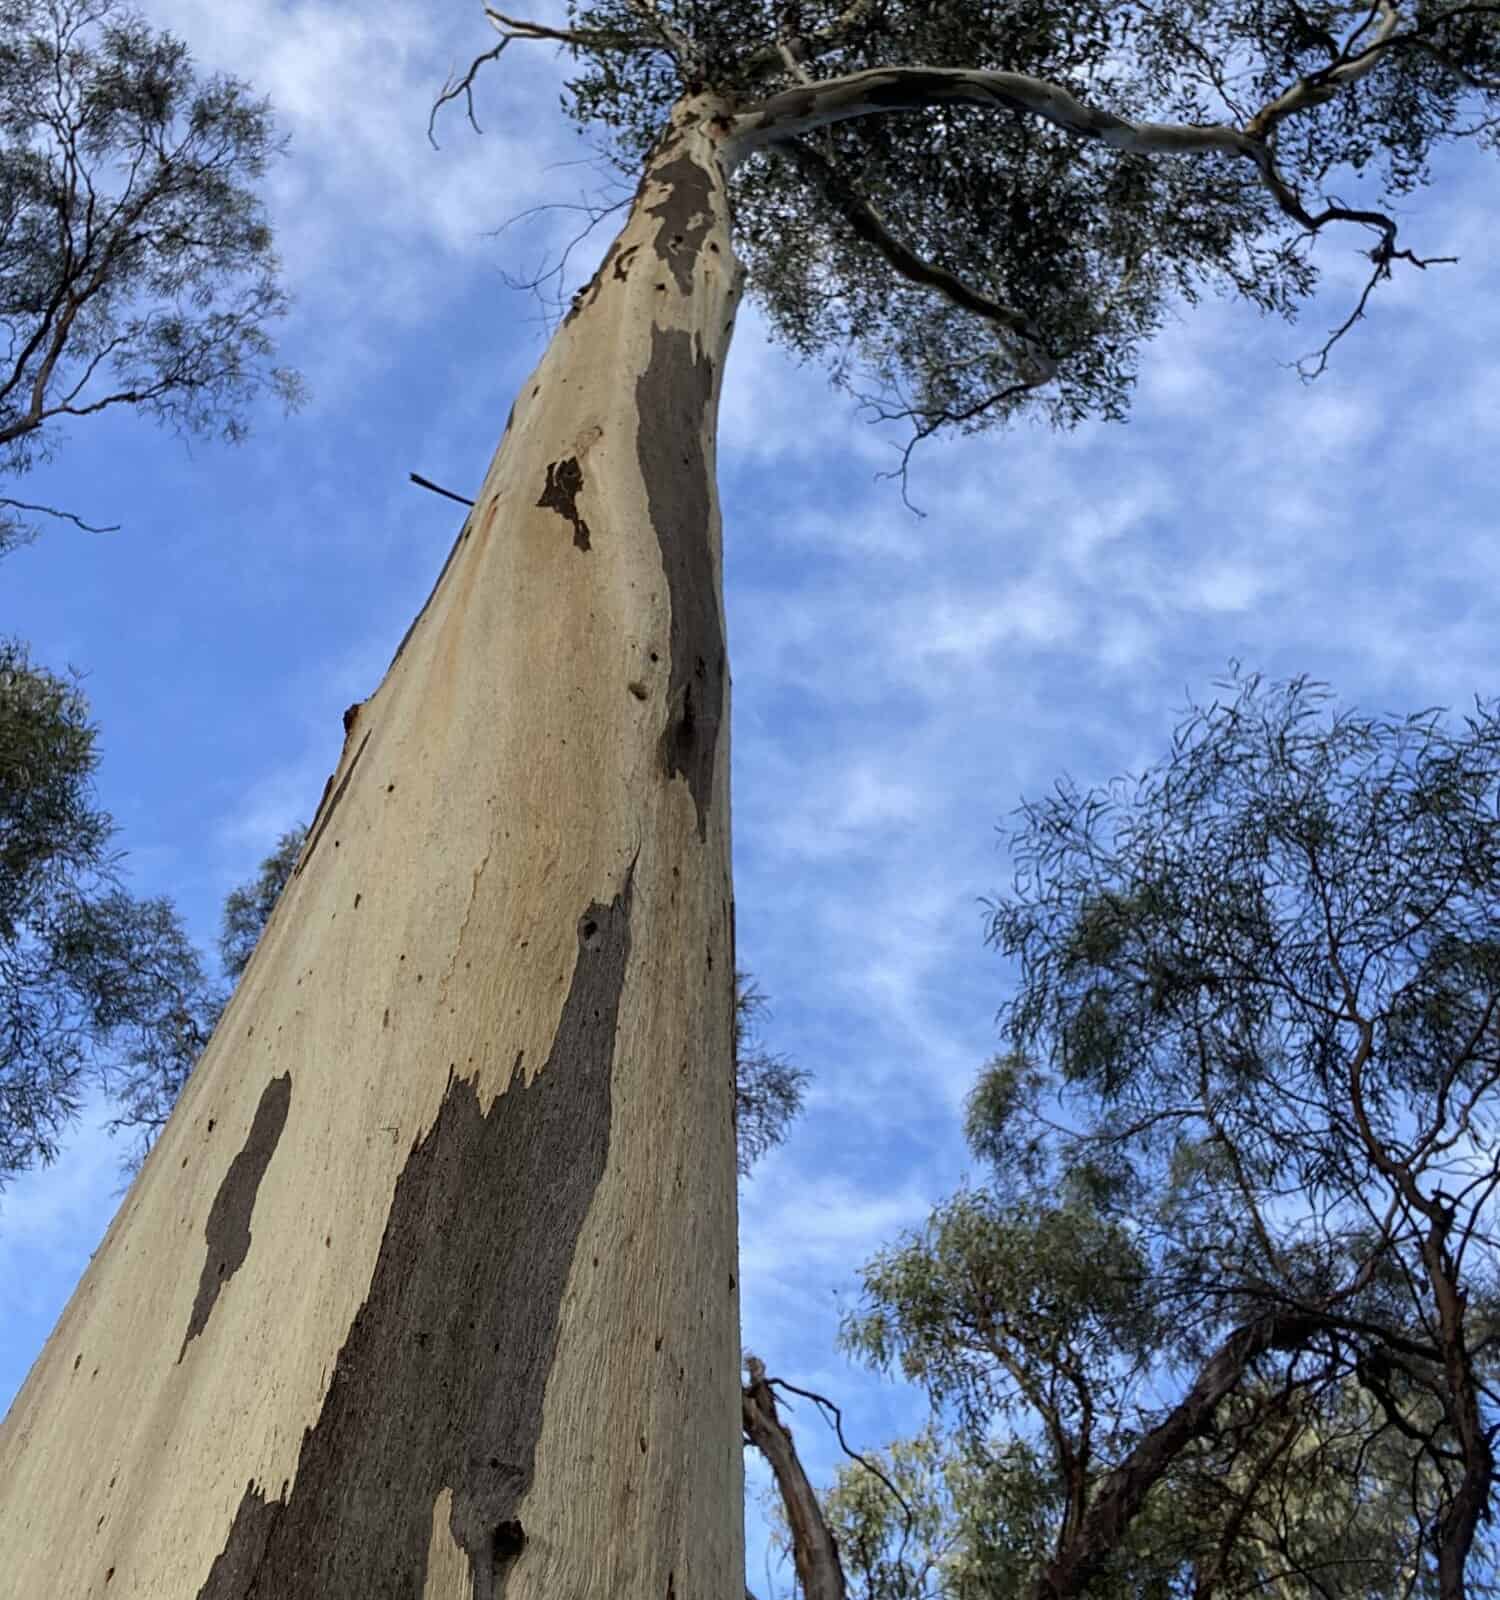 Manna gum eucalyptus tree trunk with branches and leaves at top and blue sky